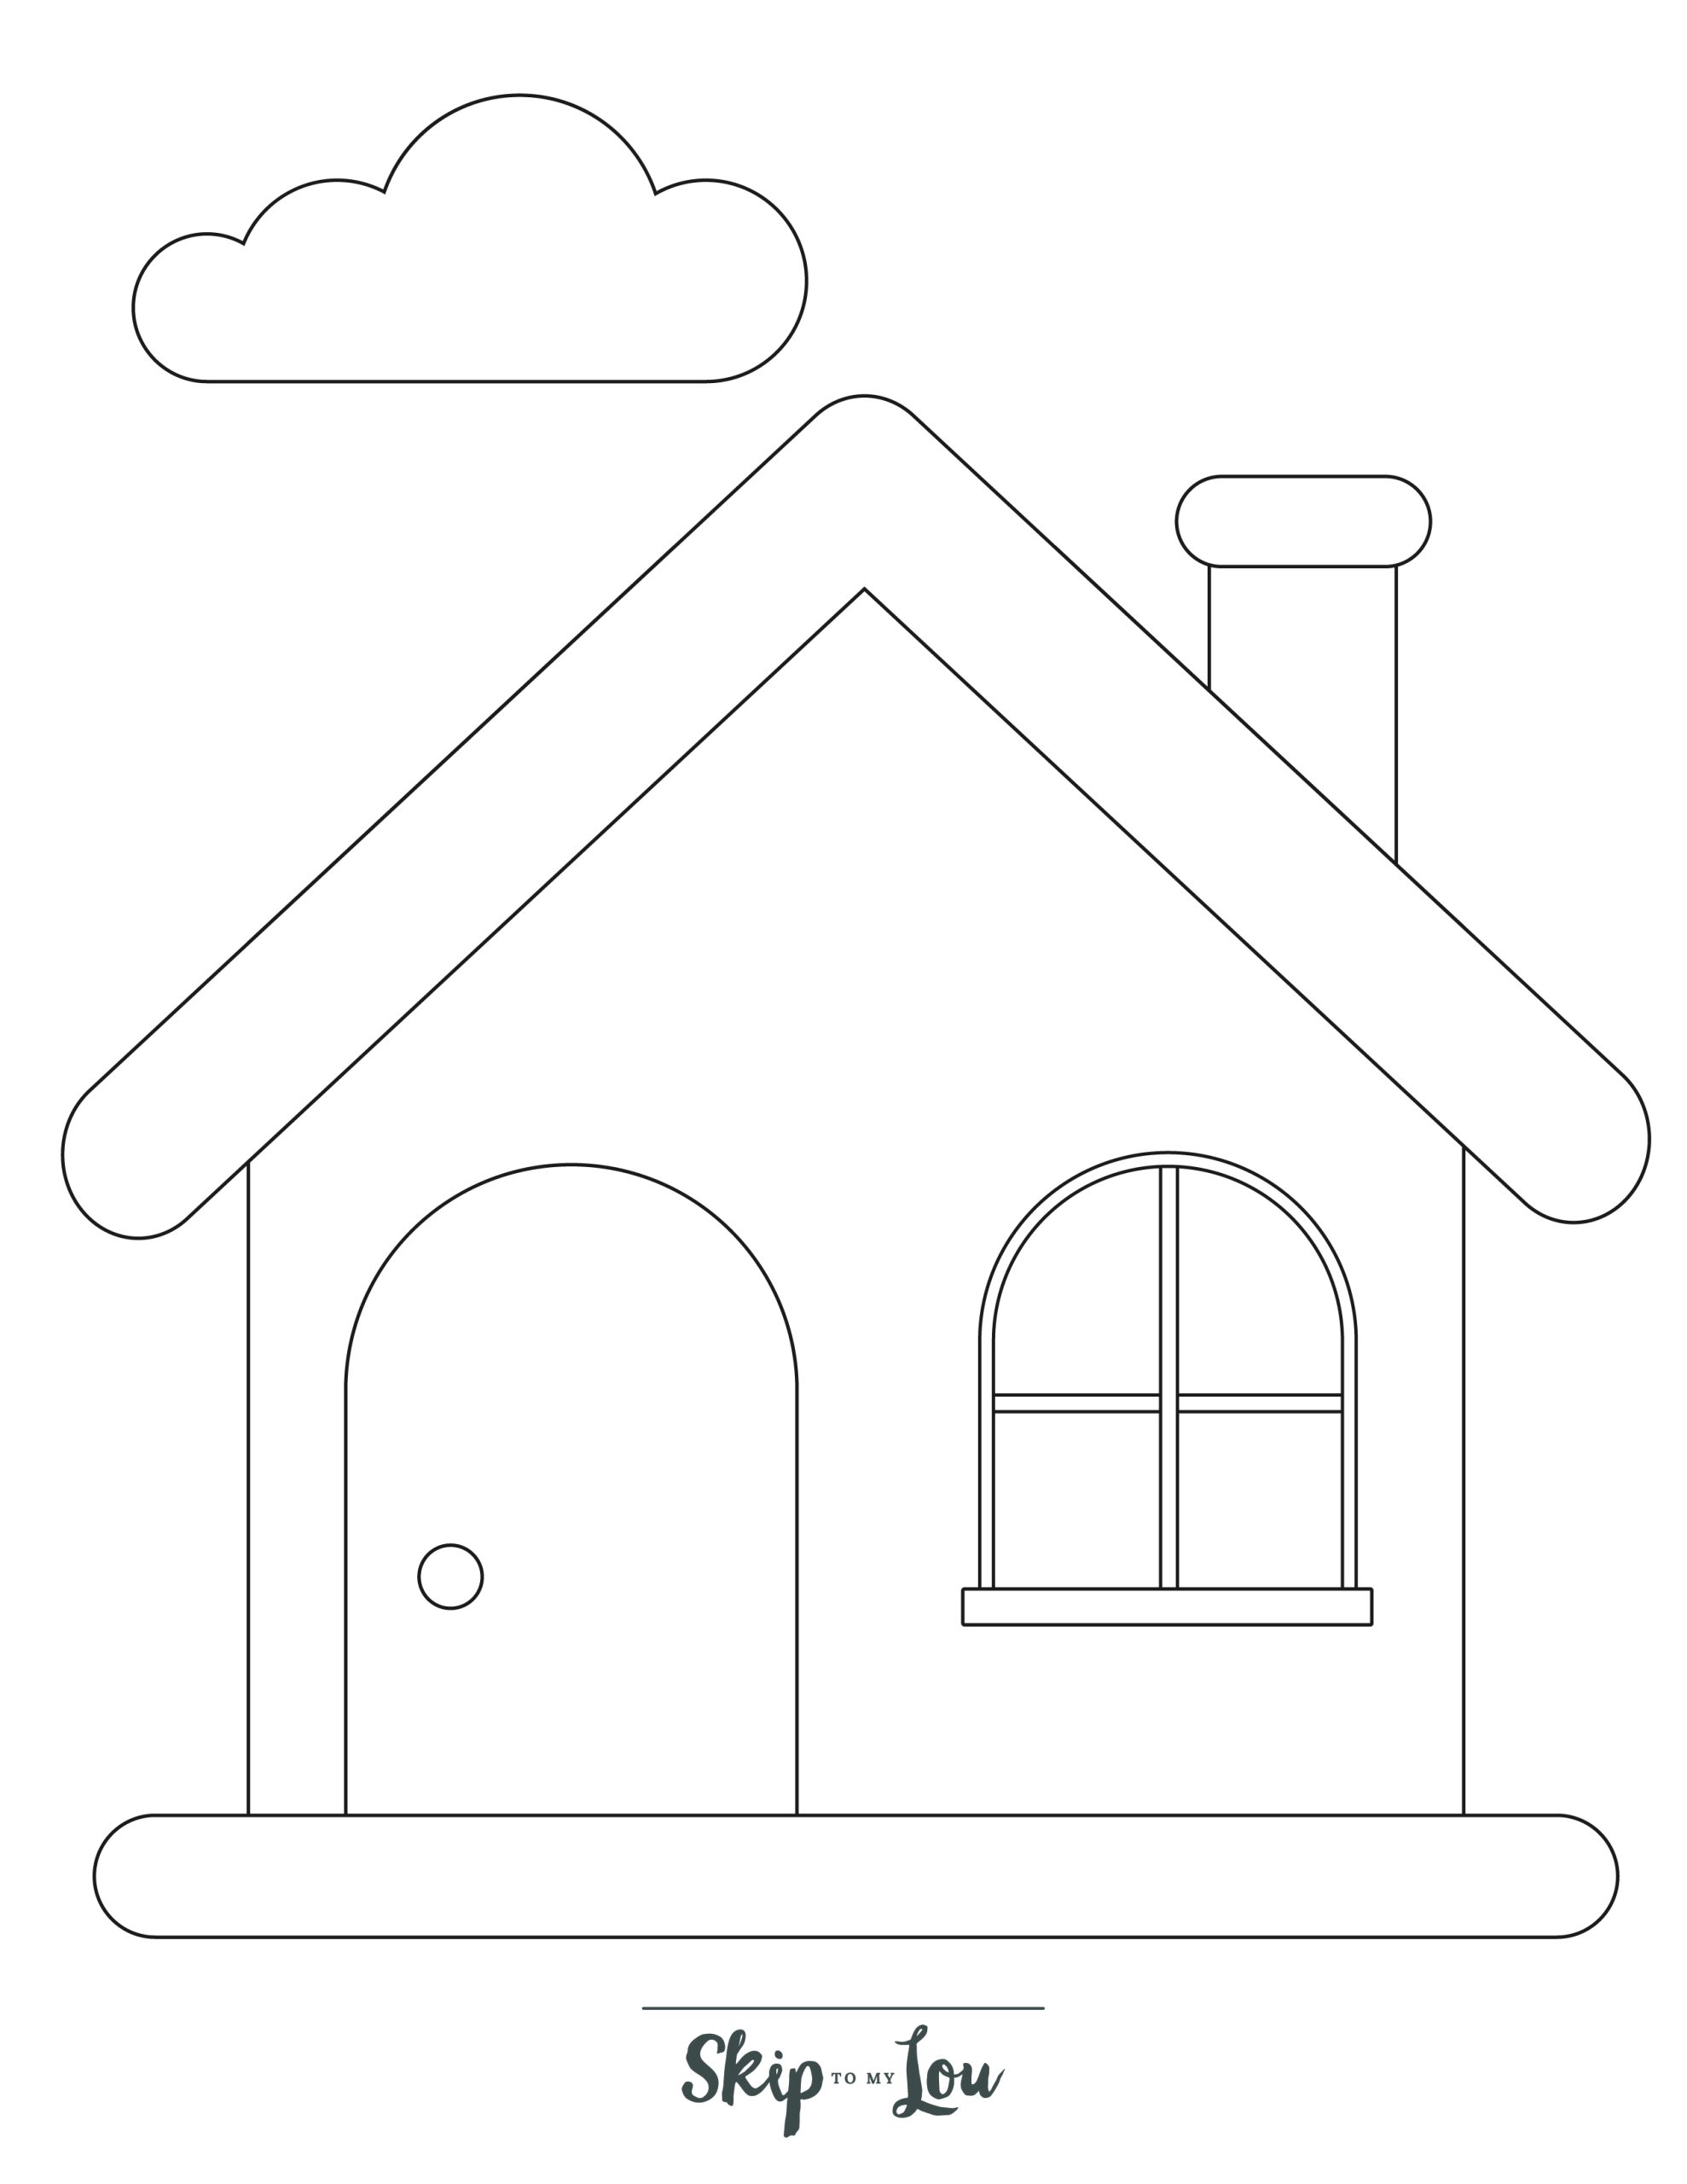 Preschool Coloring Page 6 - Simple line drawing of a house 